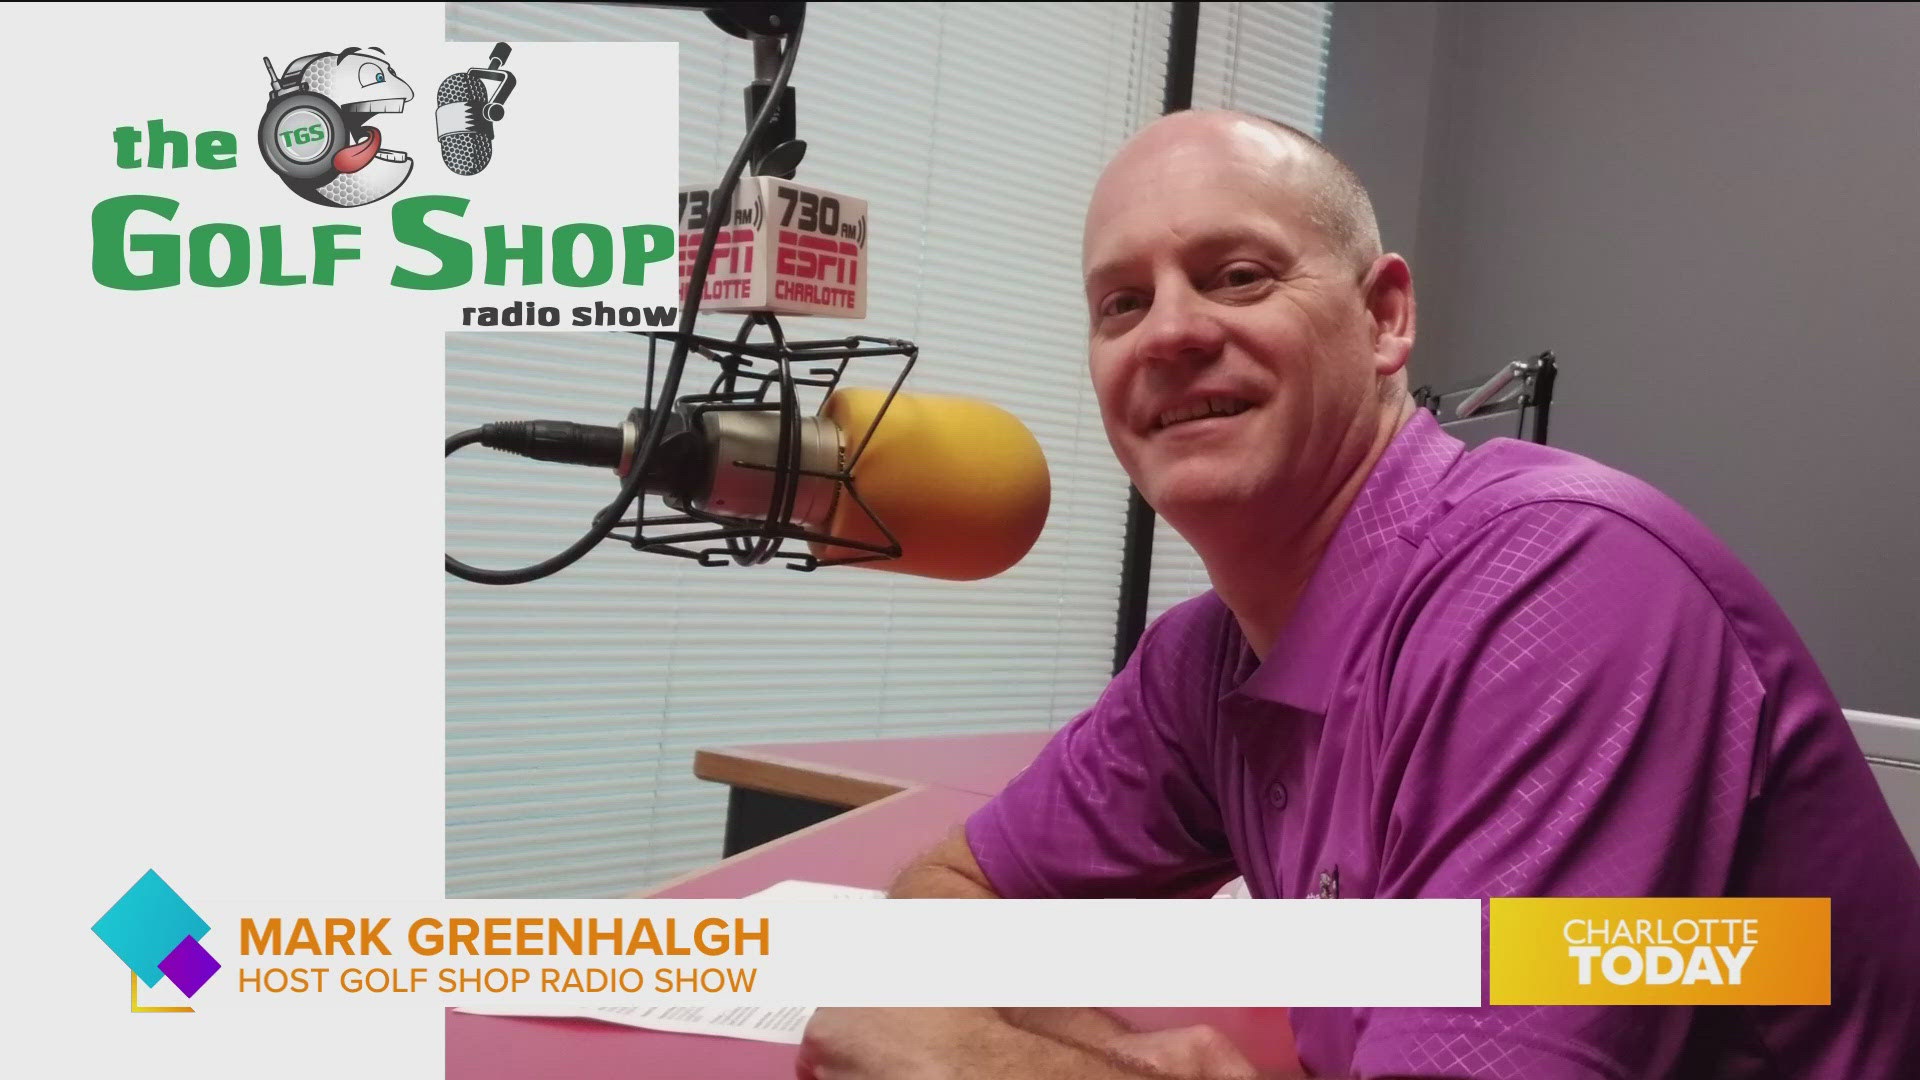 The Golf Shop Radio Show will keep you informed